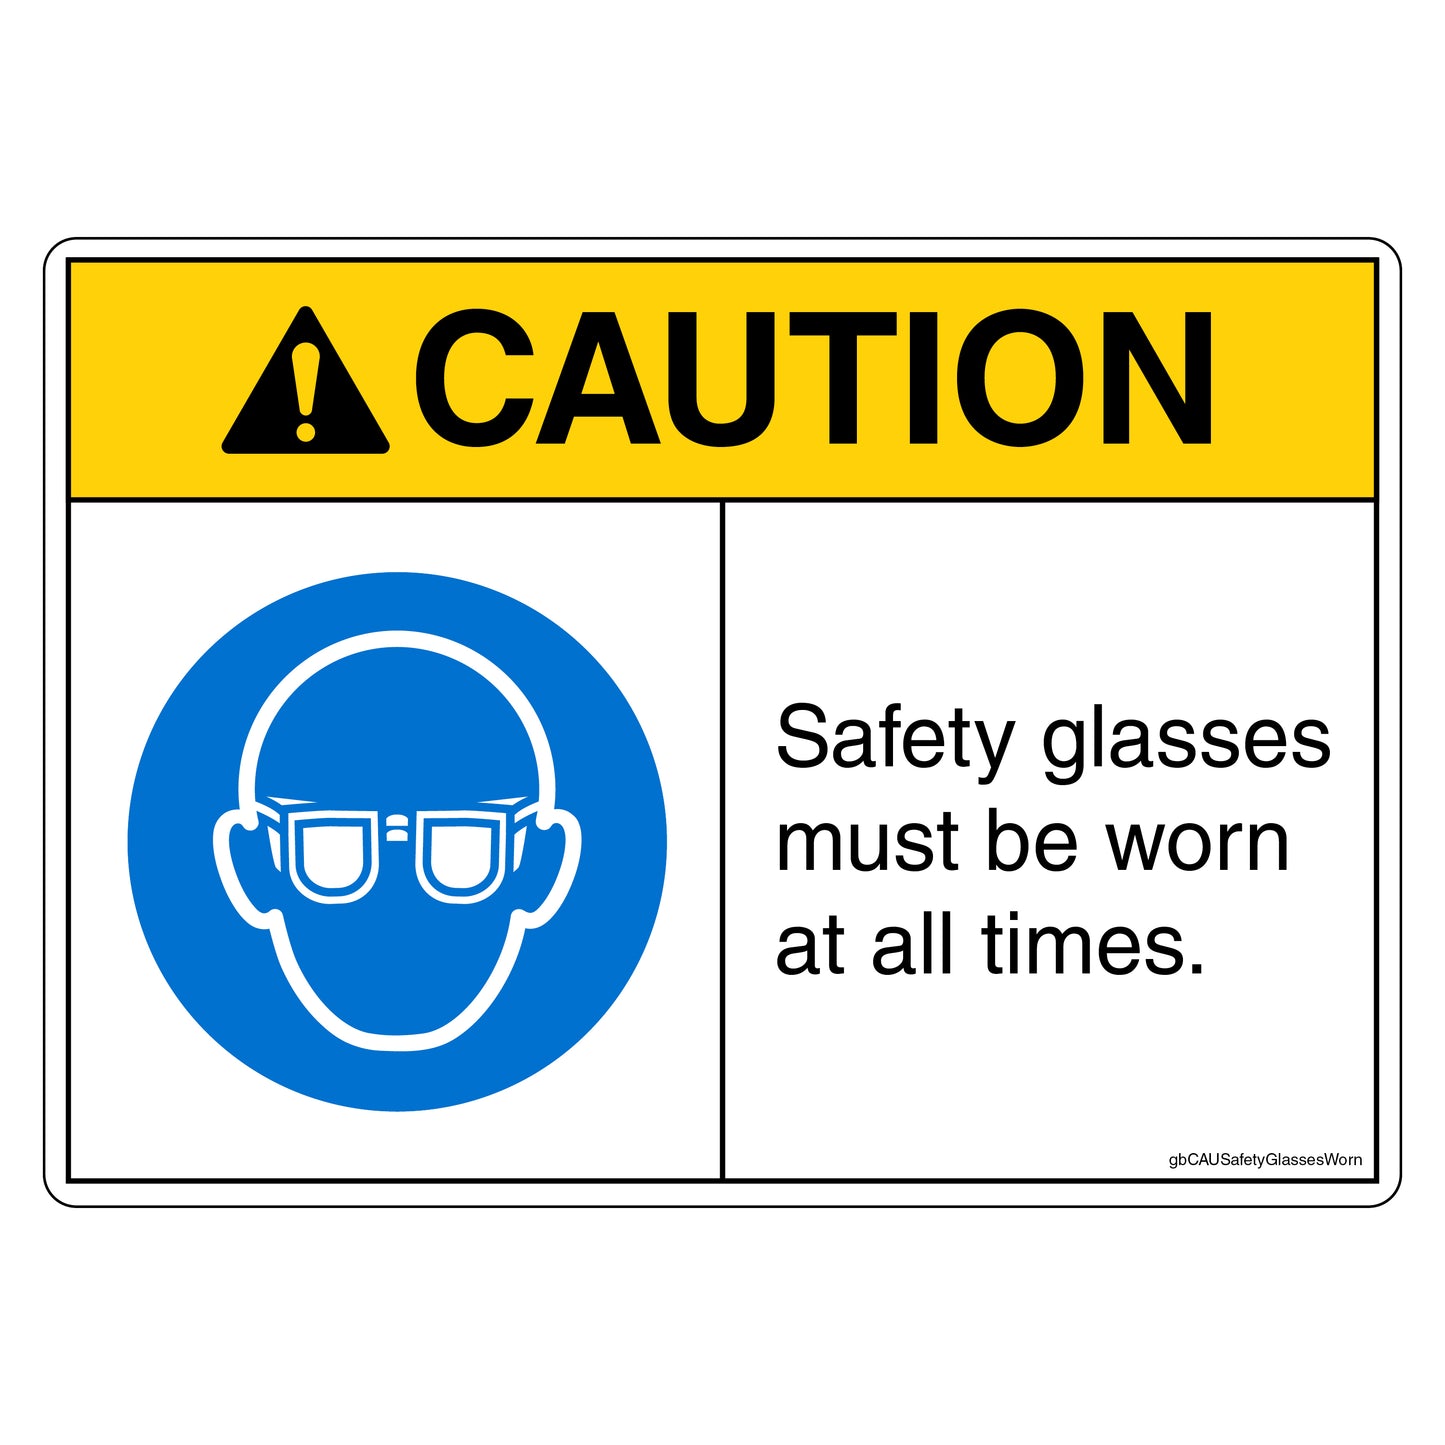 Caution Safety Glasses Must Be Worn At All Times Decal.